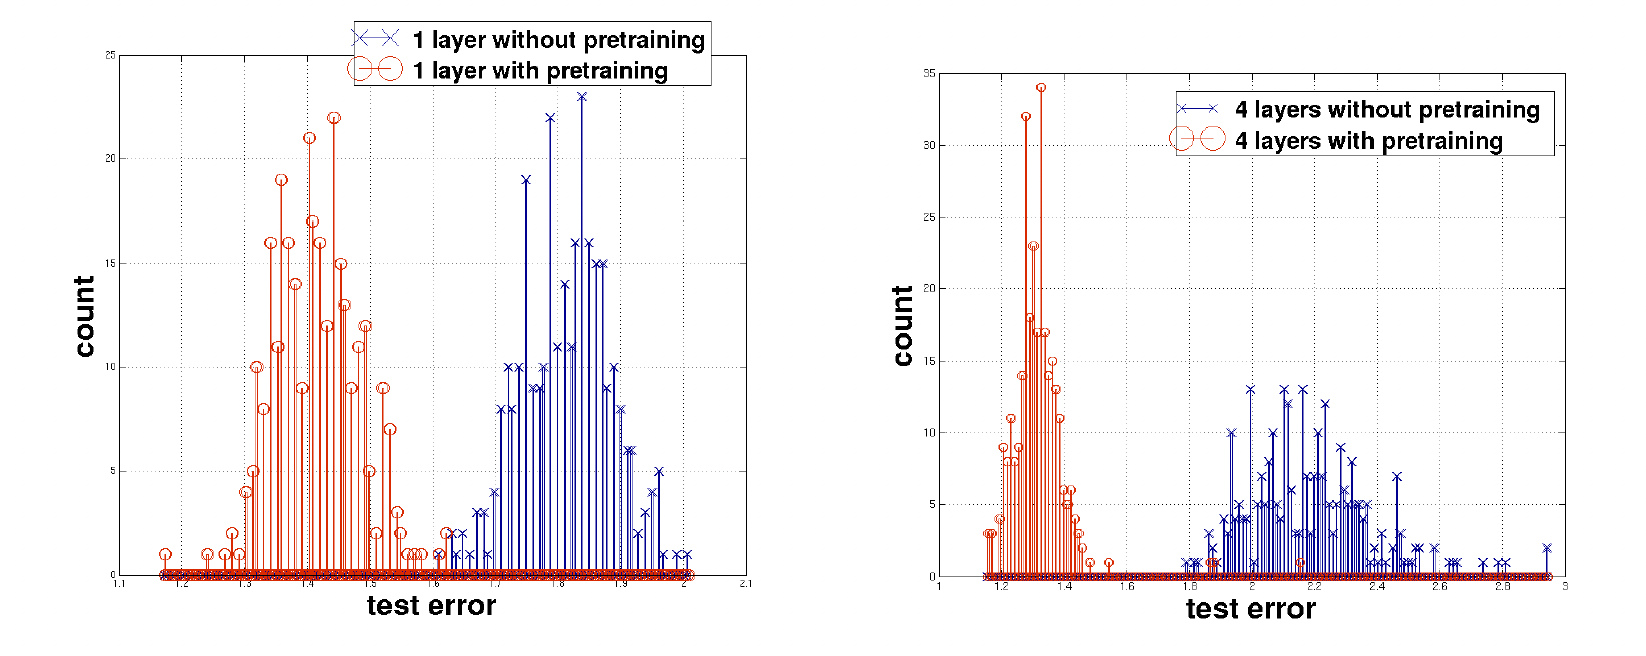 Test error comparison. Comparing test loss error on MNIST data, with 400 different iterations each. On the left, red and blue correspond to test error for one layer with and without pretraining, respectively. The right image has four layers instead of one.